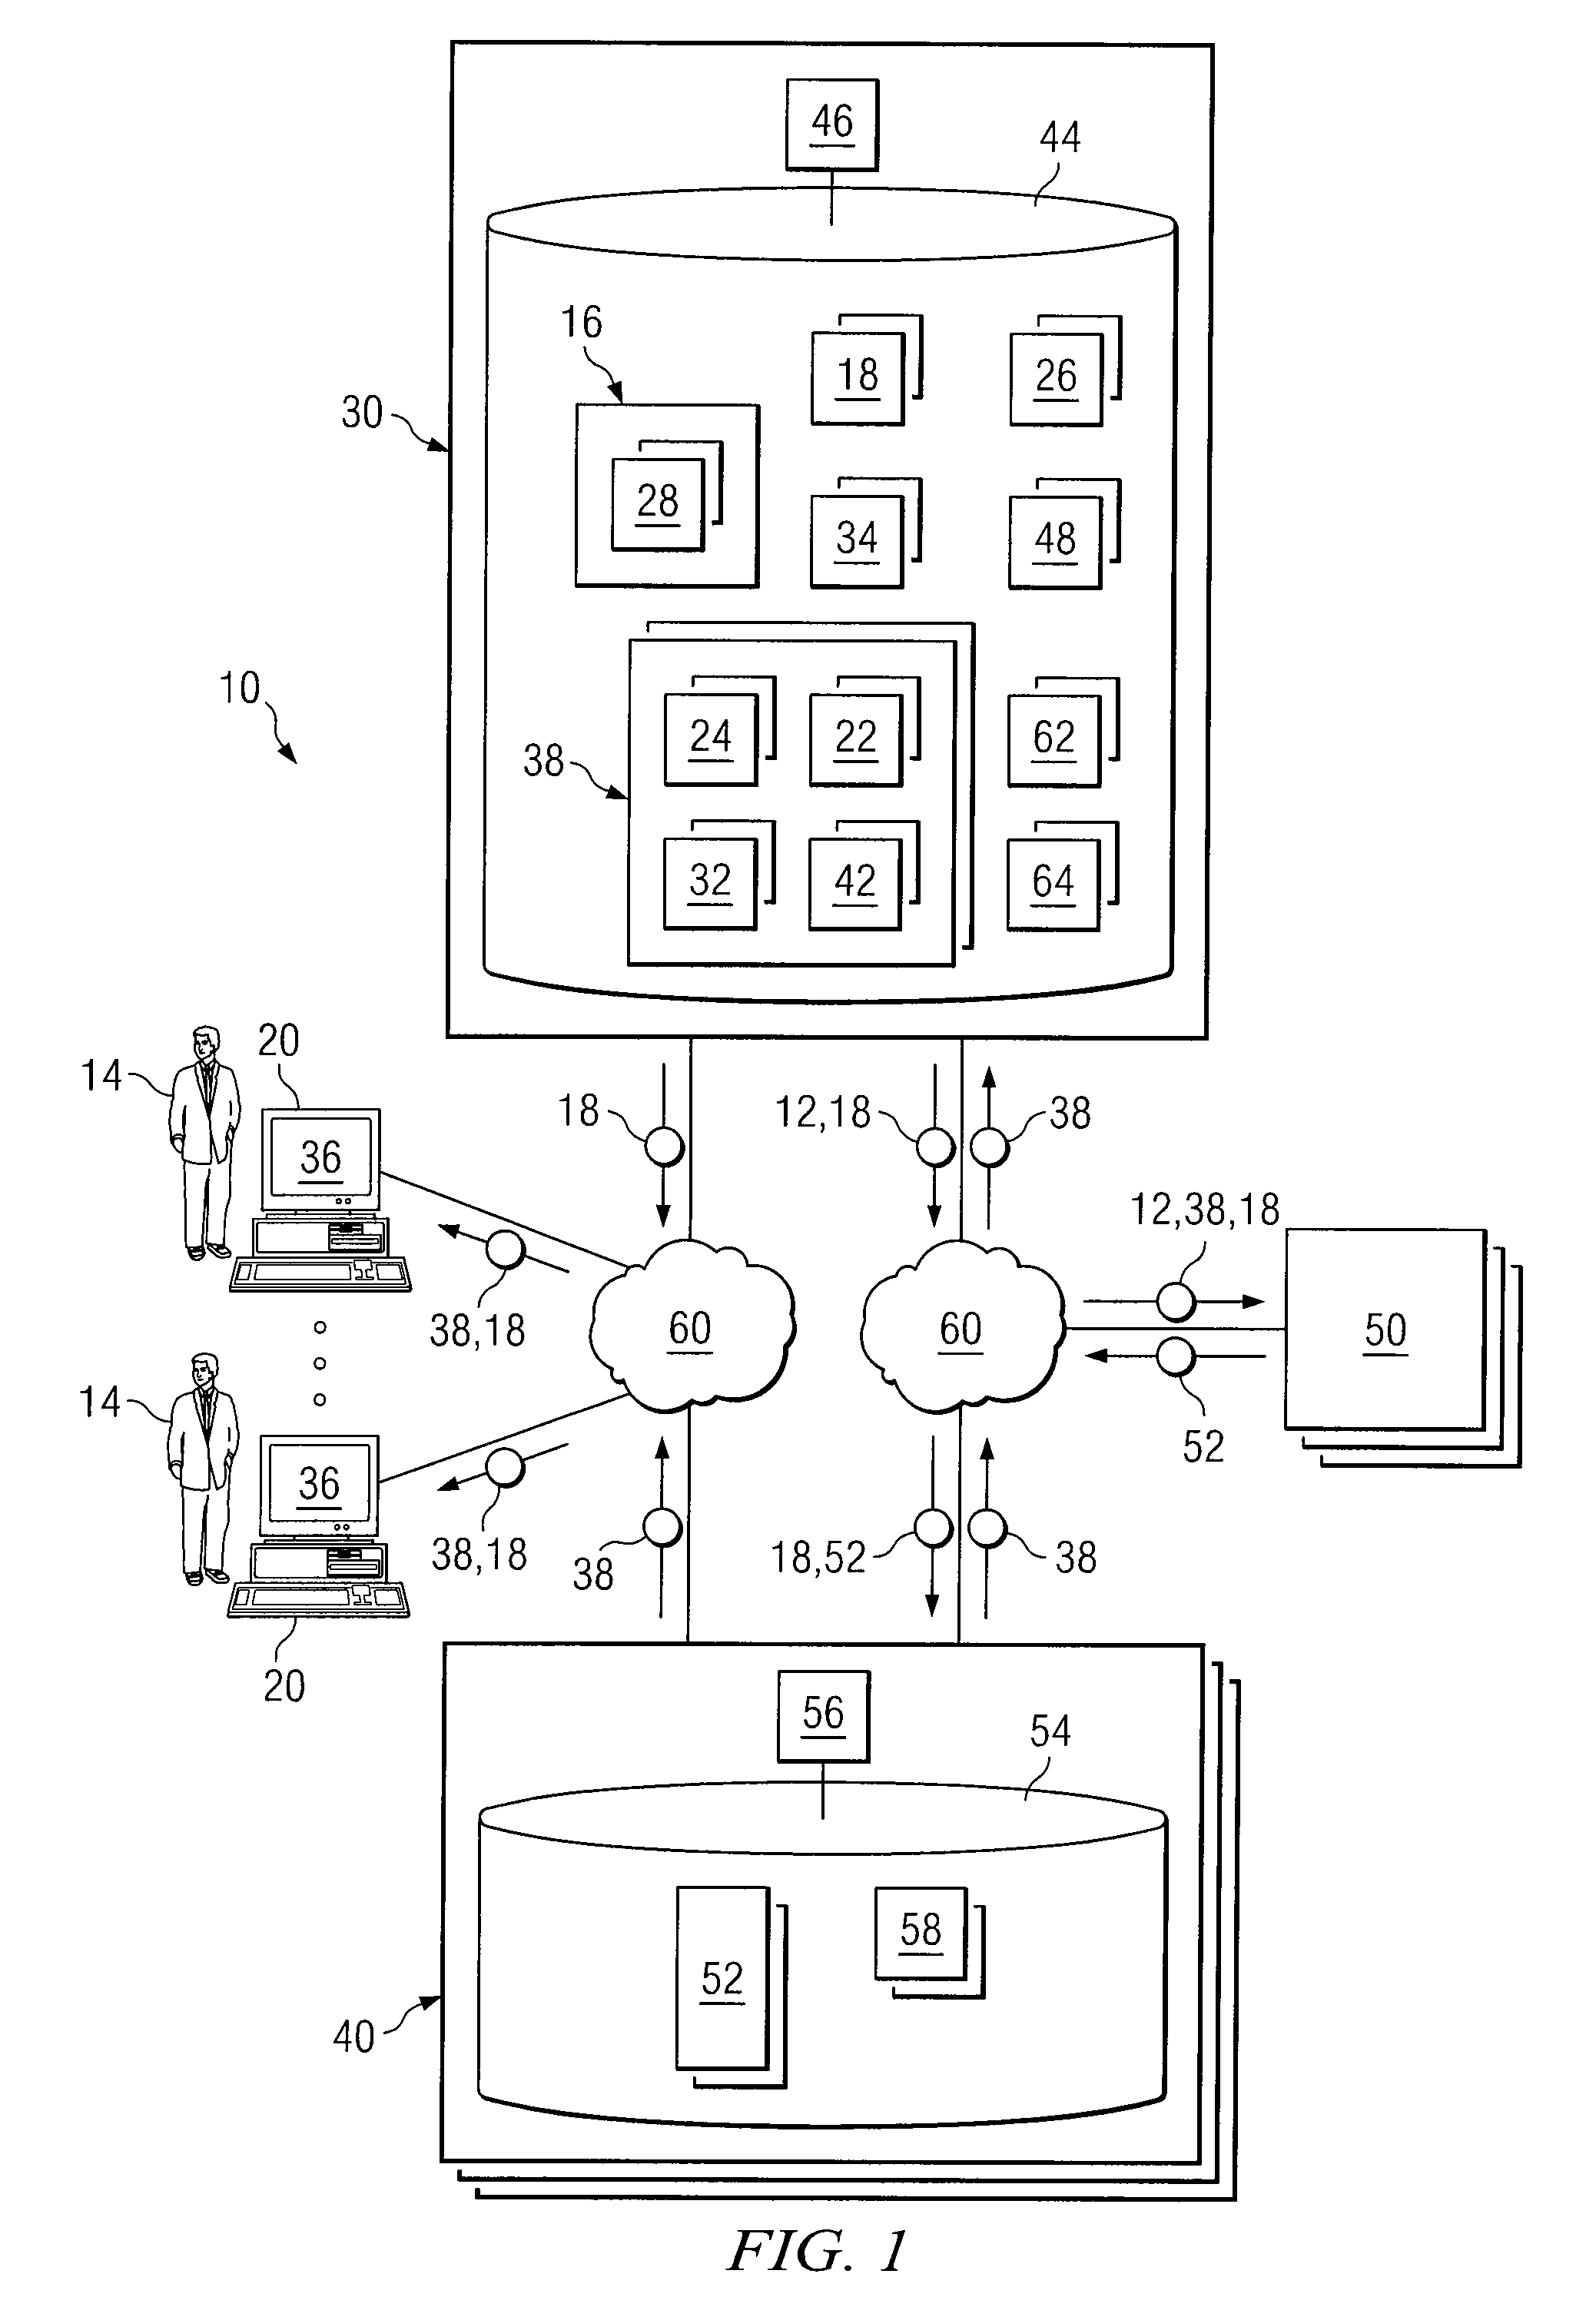 System and method for emulating a long/short hedge fund index in a trading system